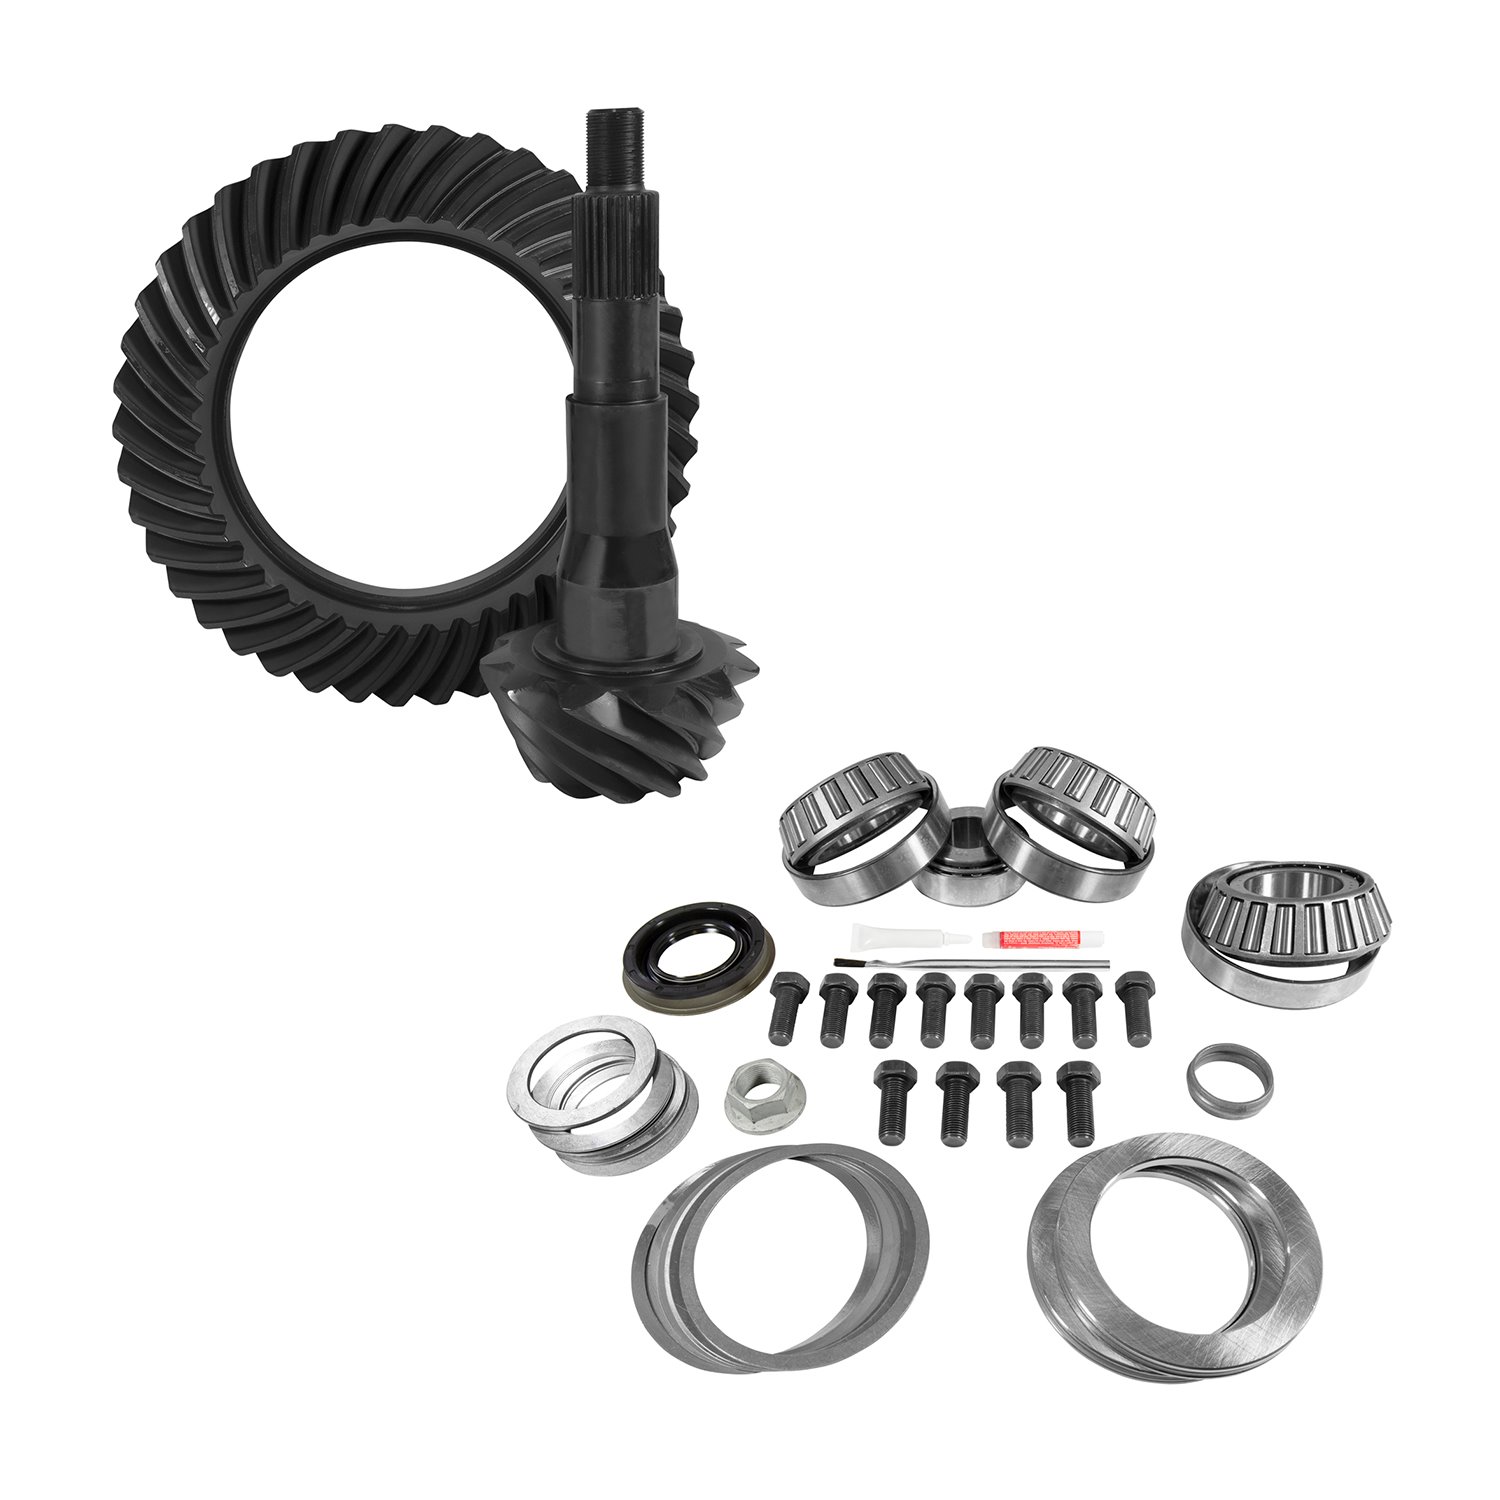 USA Standard 10850 Rear Ring & Pinion And Install Kit, 10.5 in. Ford, 4.30